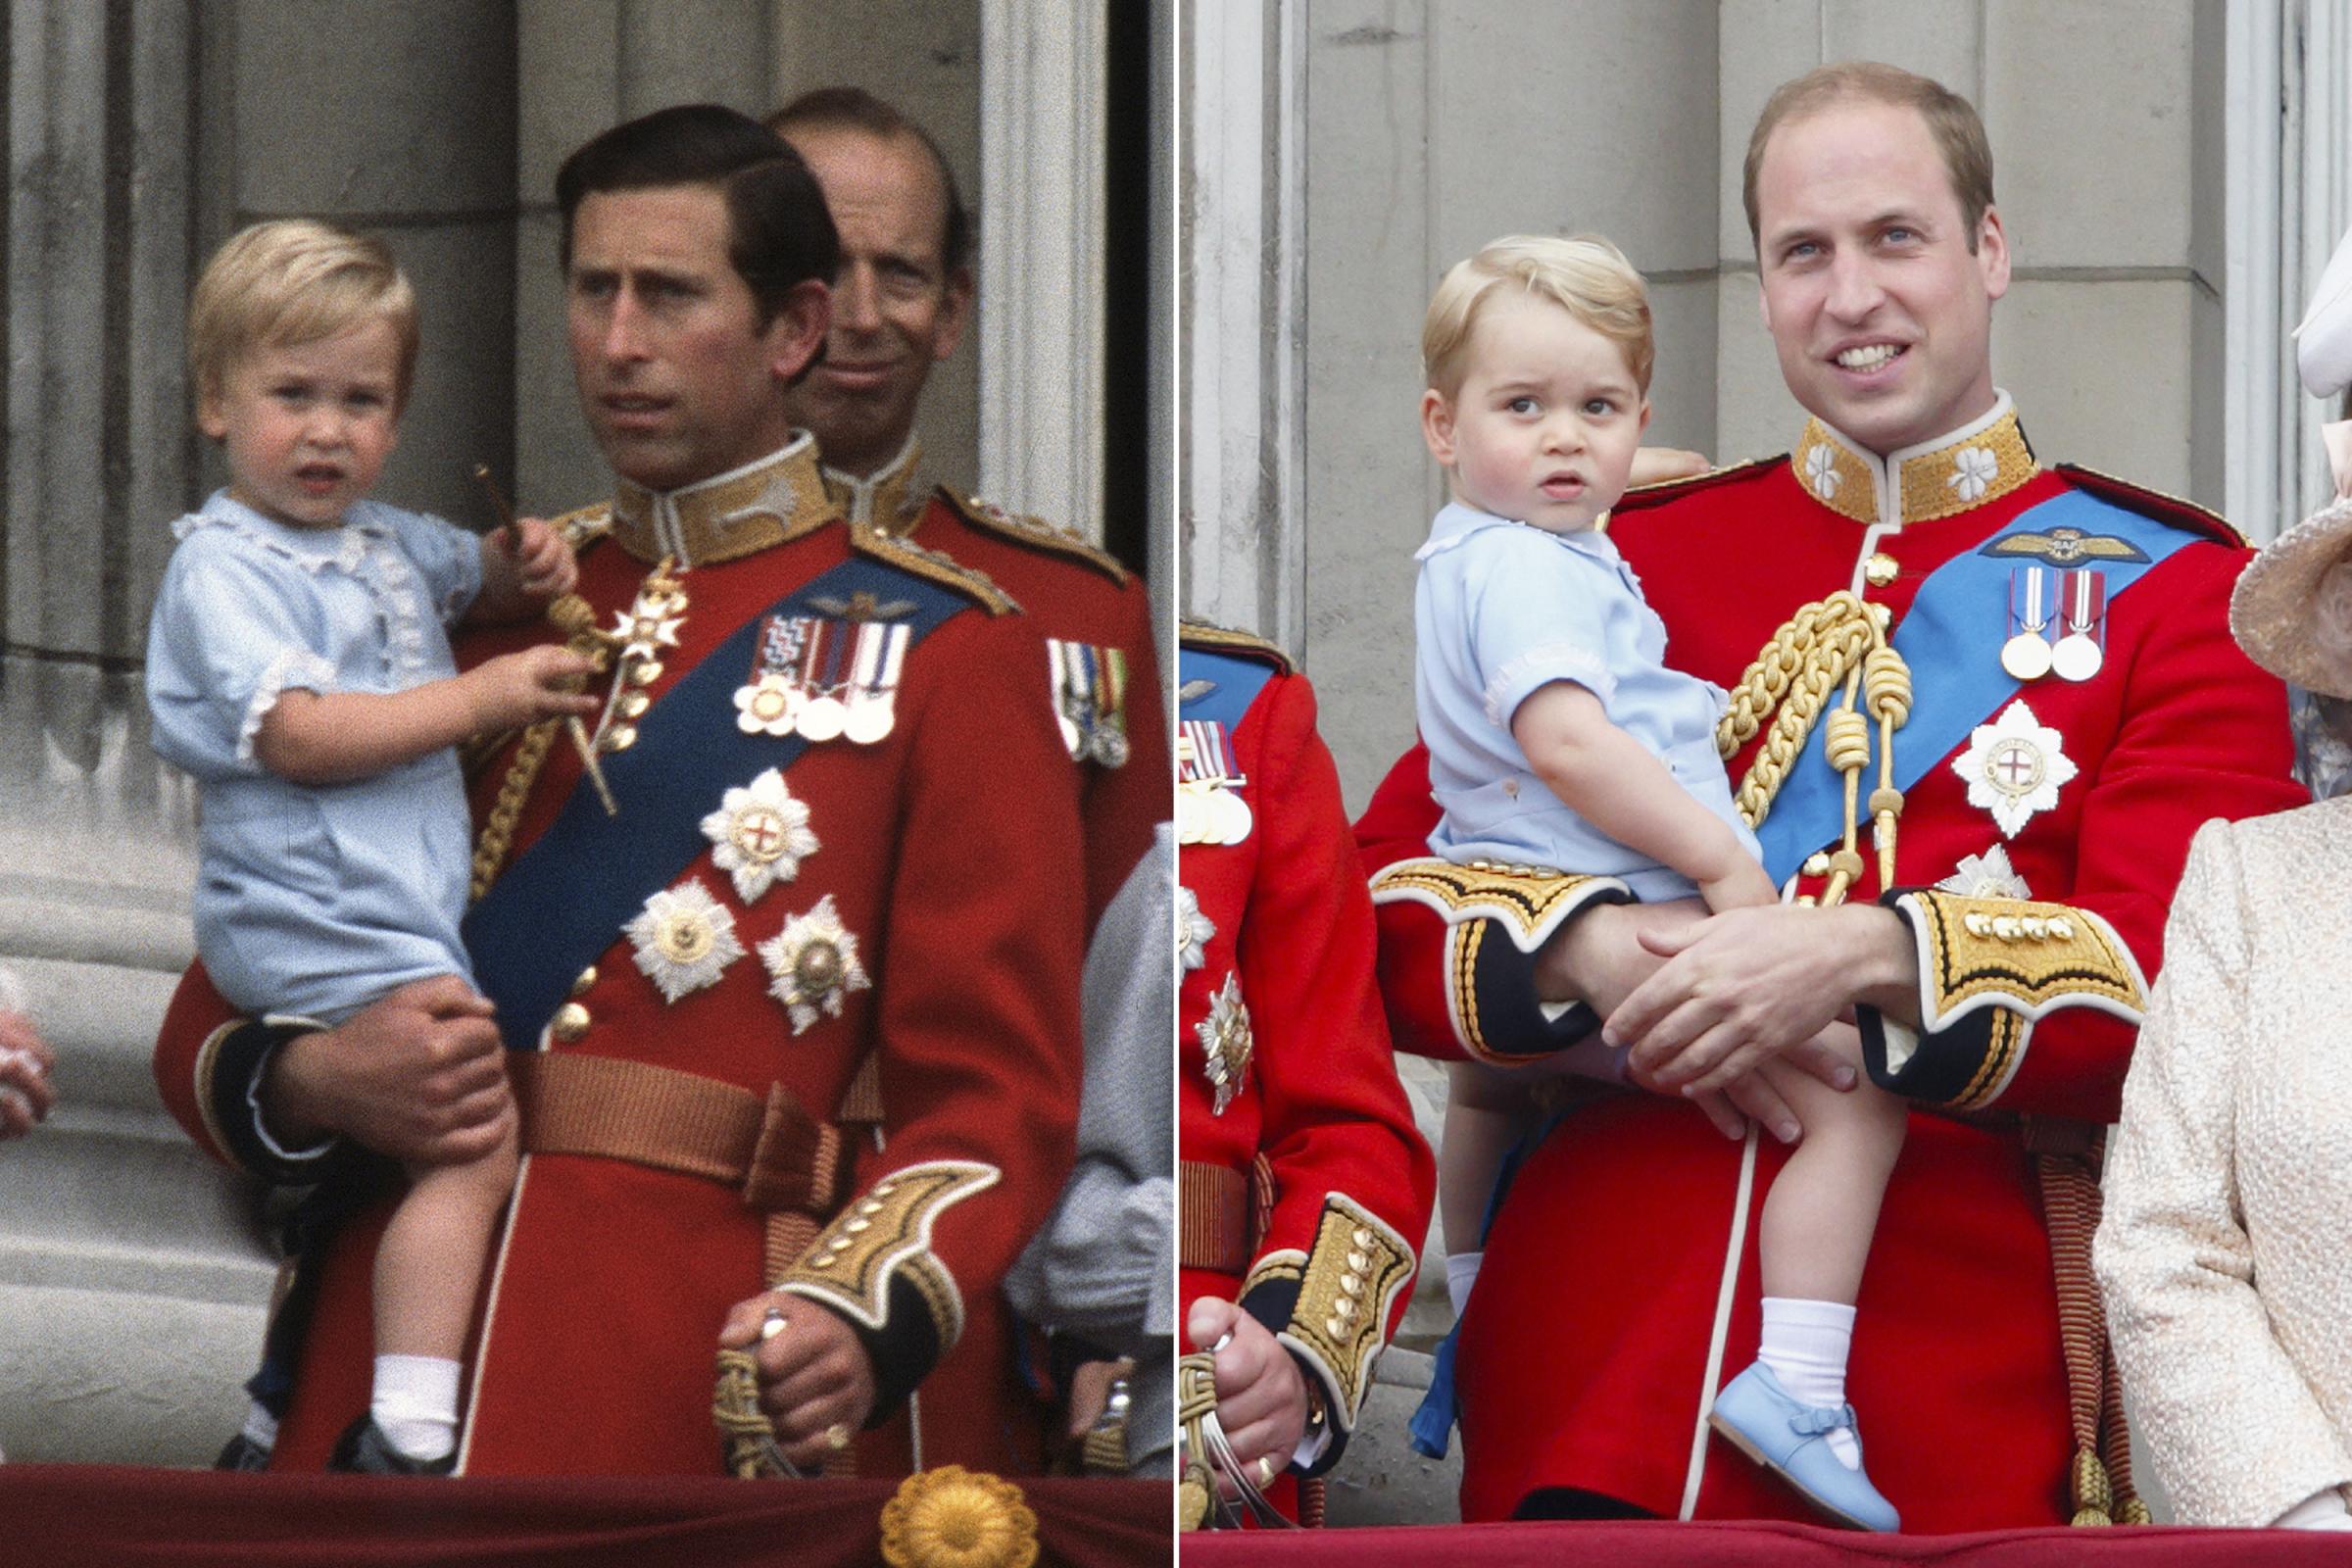 Left: Prince Charles holds Prince William on the balcony of Buckingham Palace following the Trooping the Colour ceremony in London, June 16, 1984. Right: Prince William holds Prince George on the balcony of Buckingham Palace following the Trooping the Colour ceremony in London, June 13, 2015.